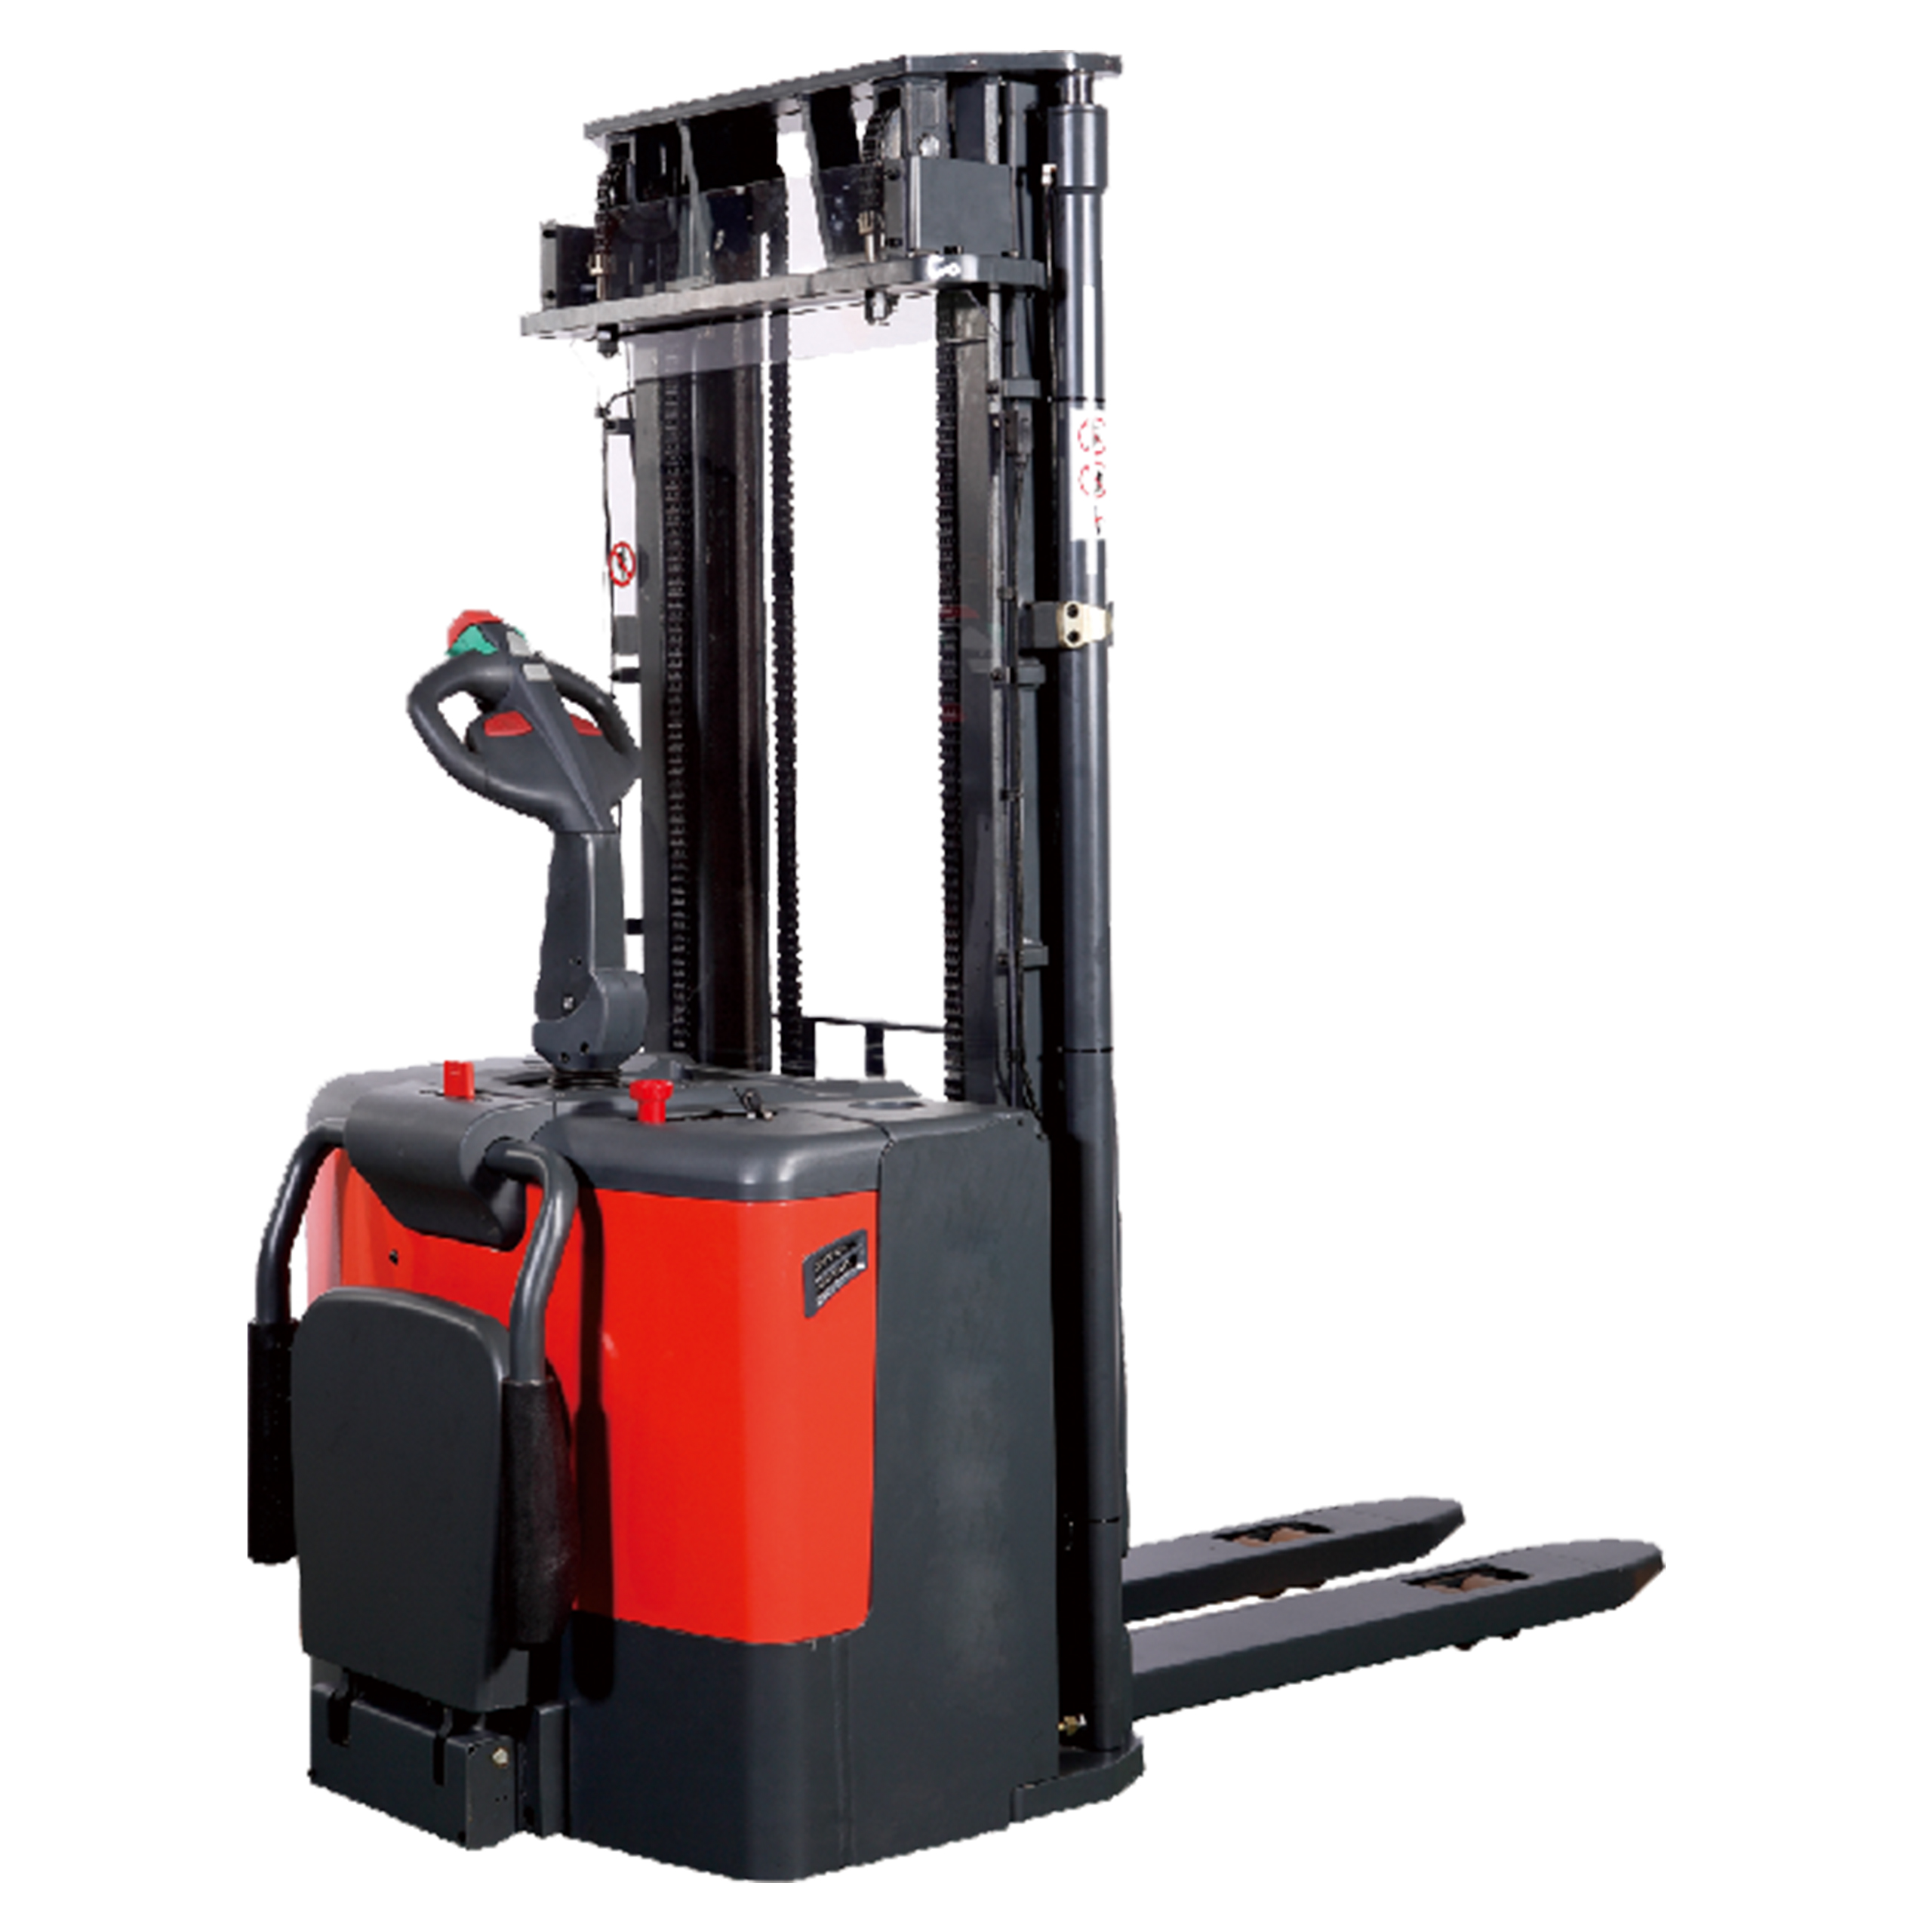 harriston machine PS16W PSB12/15 electric pedestrian stacker electric stacker forklift powered stackers